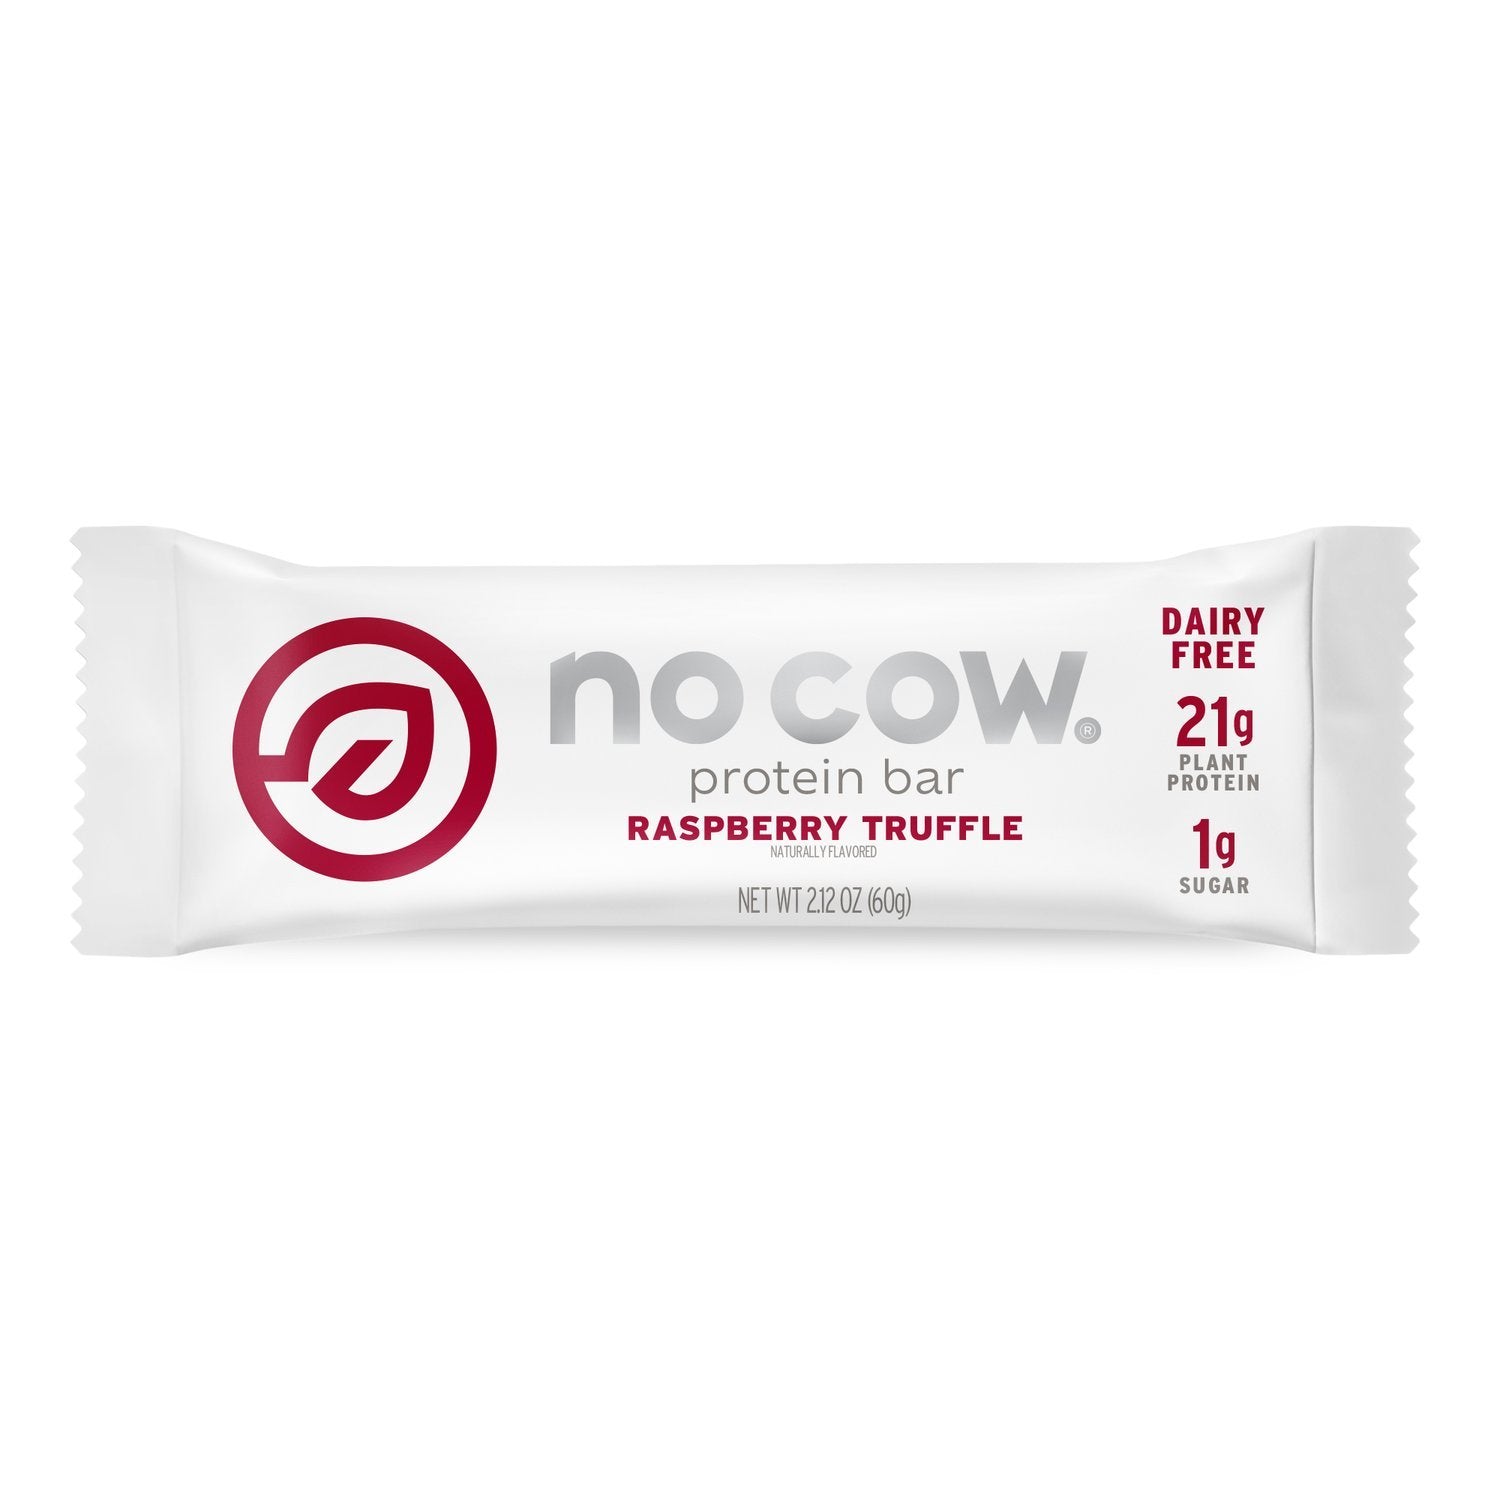 No Cow Plant Based Protein Bars No Cow Raspberry Truffle 2.12 Ounce 